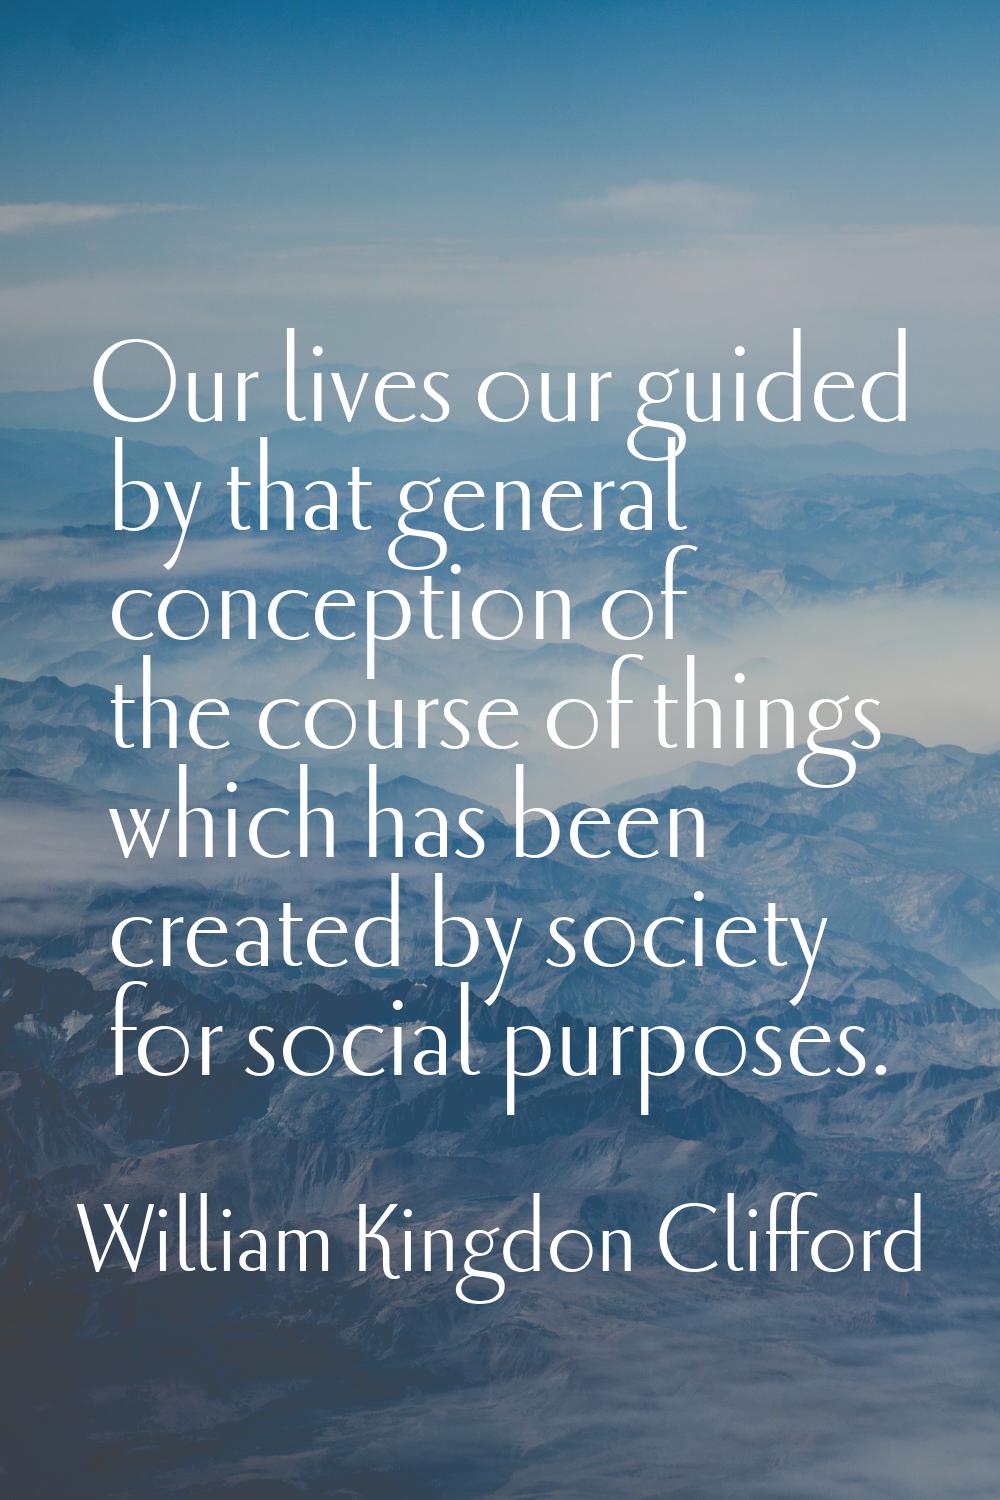 Our lives our guided by that general conception of the course of things which has been created by s